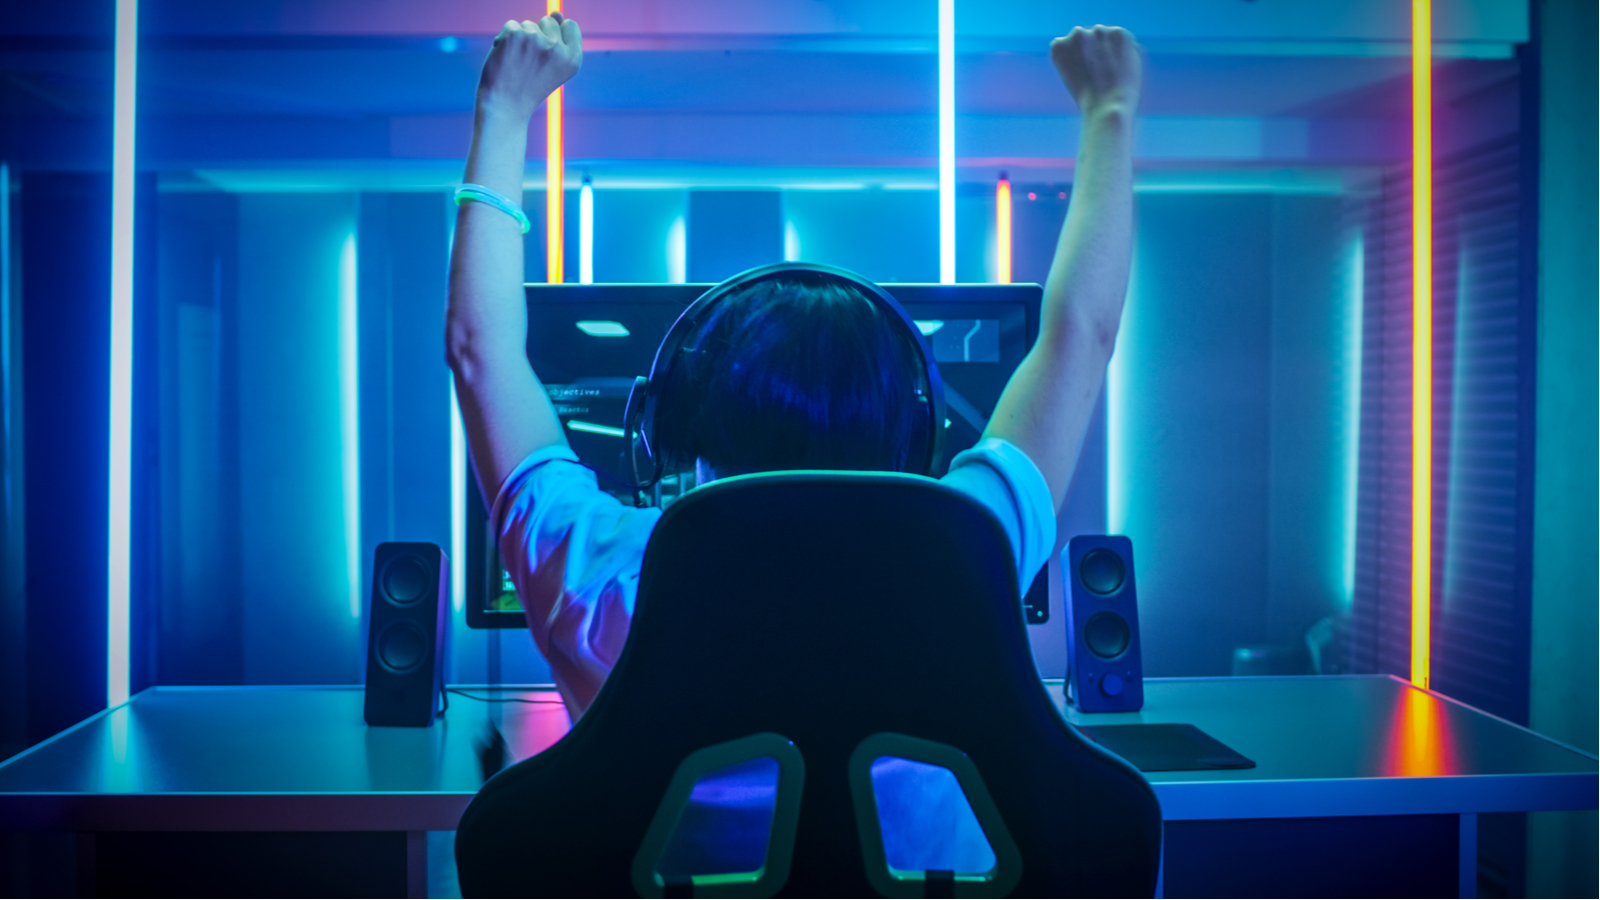 eSports gaming stocks - Next-Level Gaming: 3 Stocks to Buy for the Booming eSports Trend